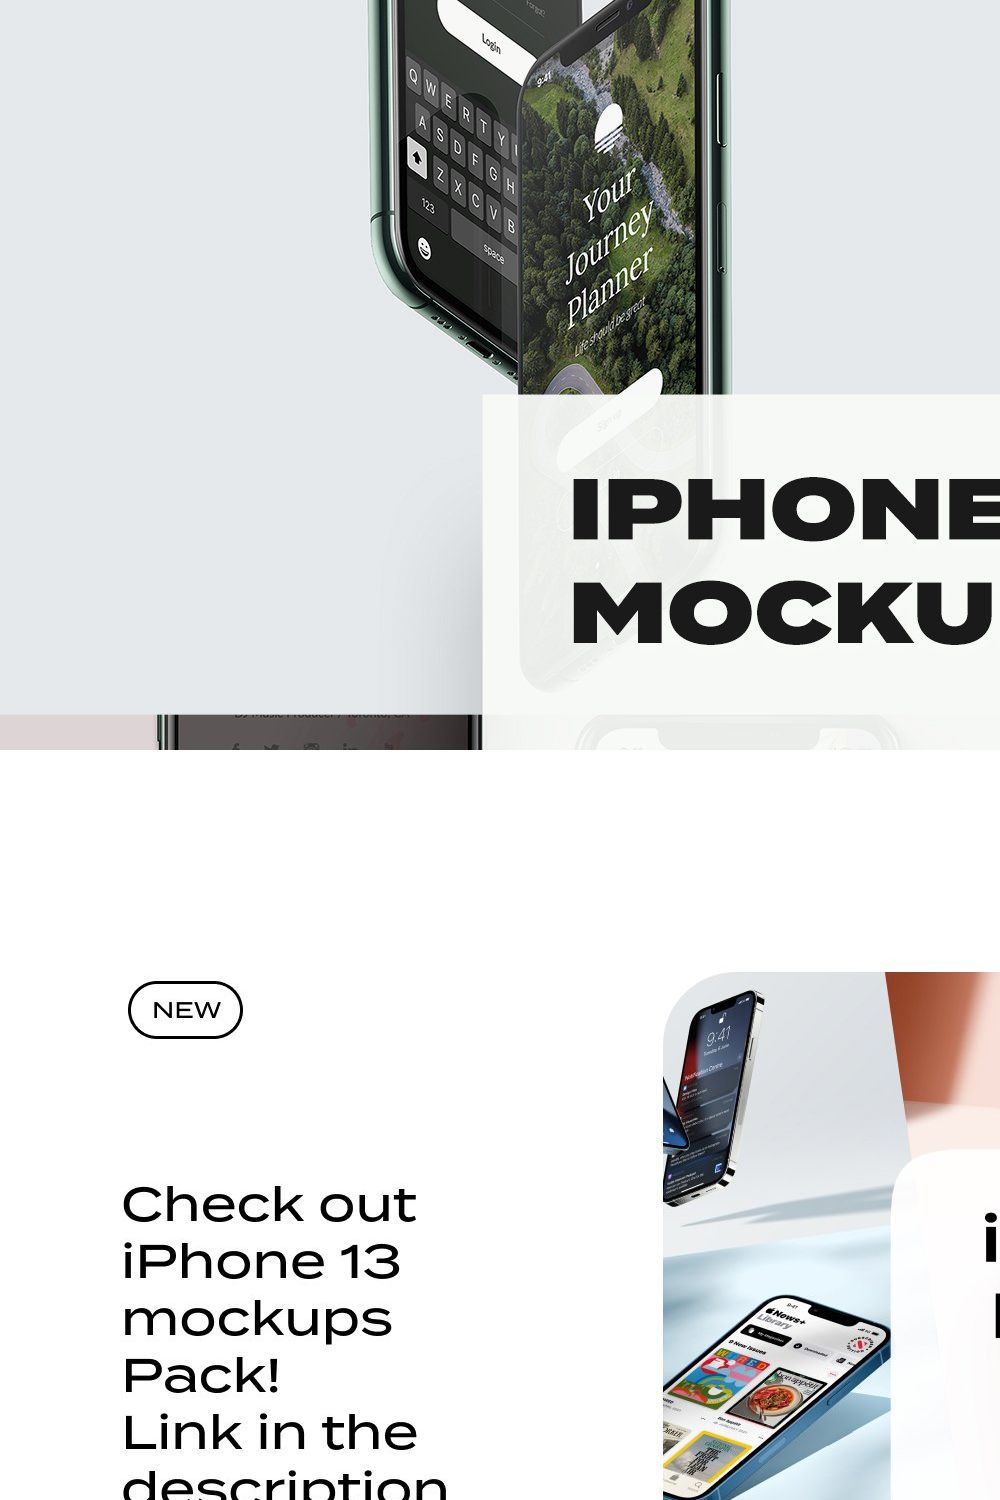 iPhone 11 Mockup PSD - sketch pinterest preview image.